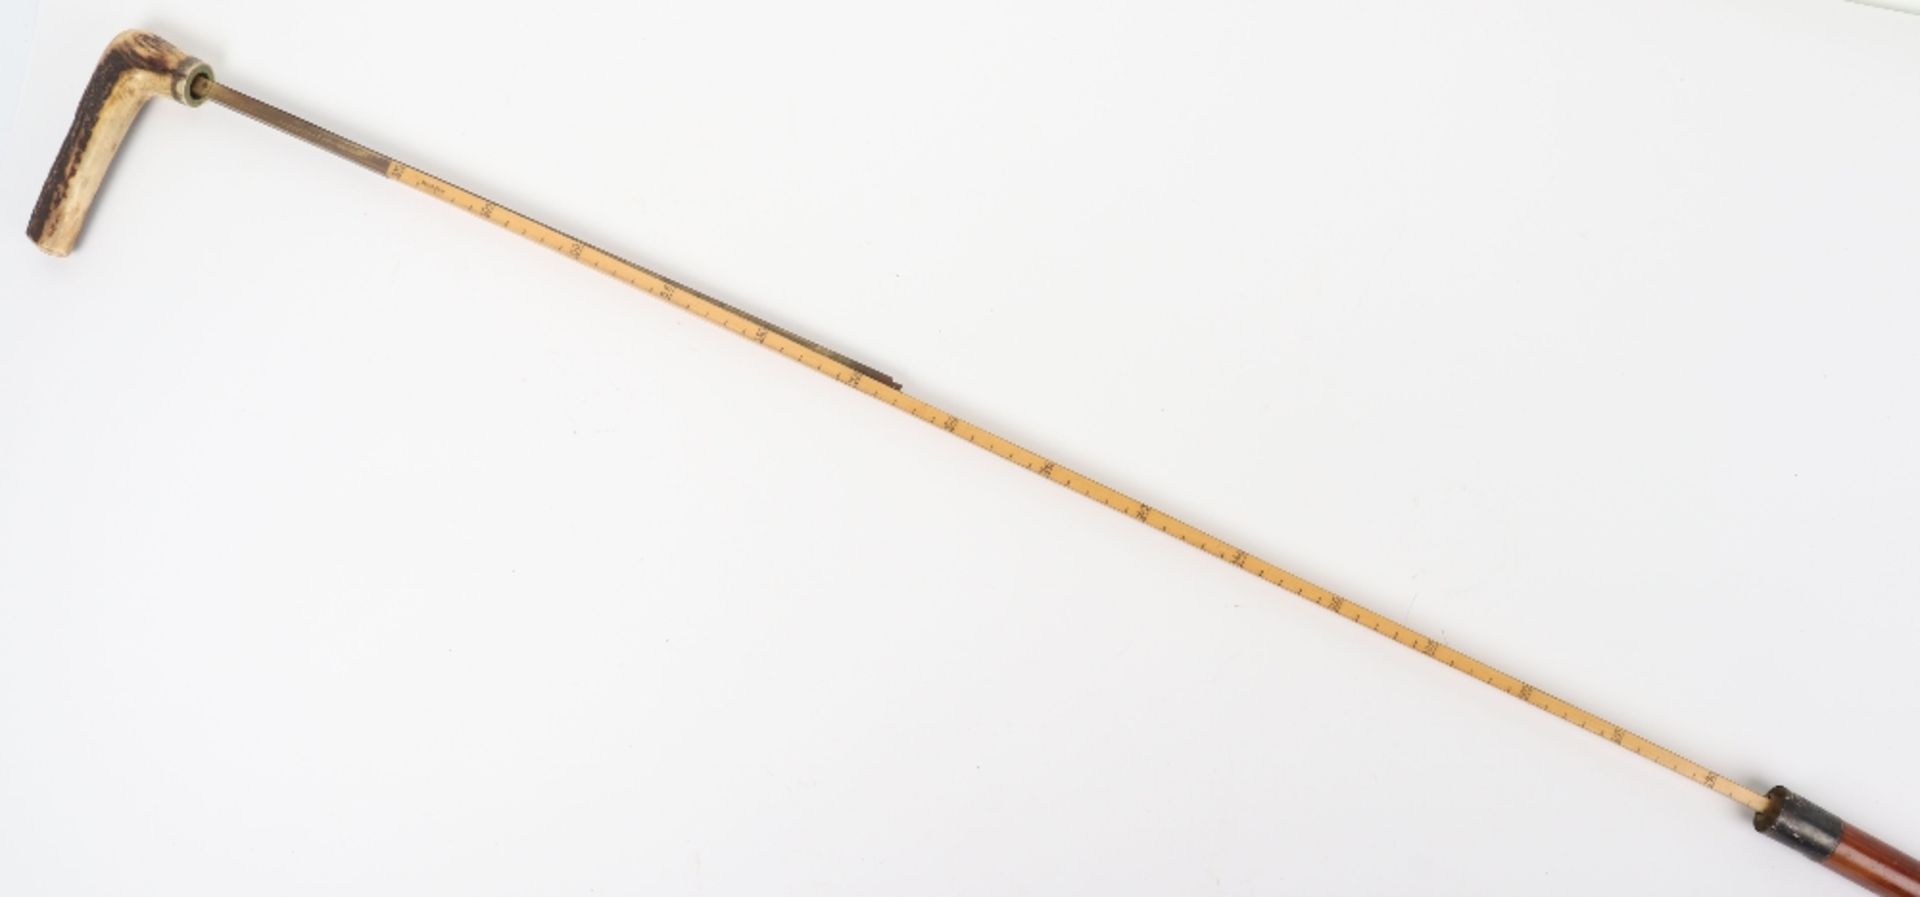 An Edwardian walking stick with spirit level (lacking liquid) and scaled ruler, with horn handle - Image 5 of 14